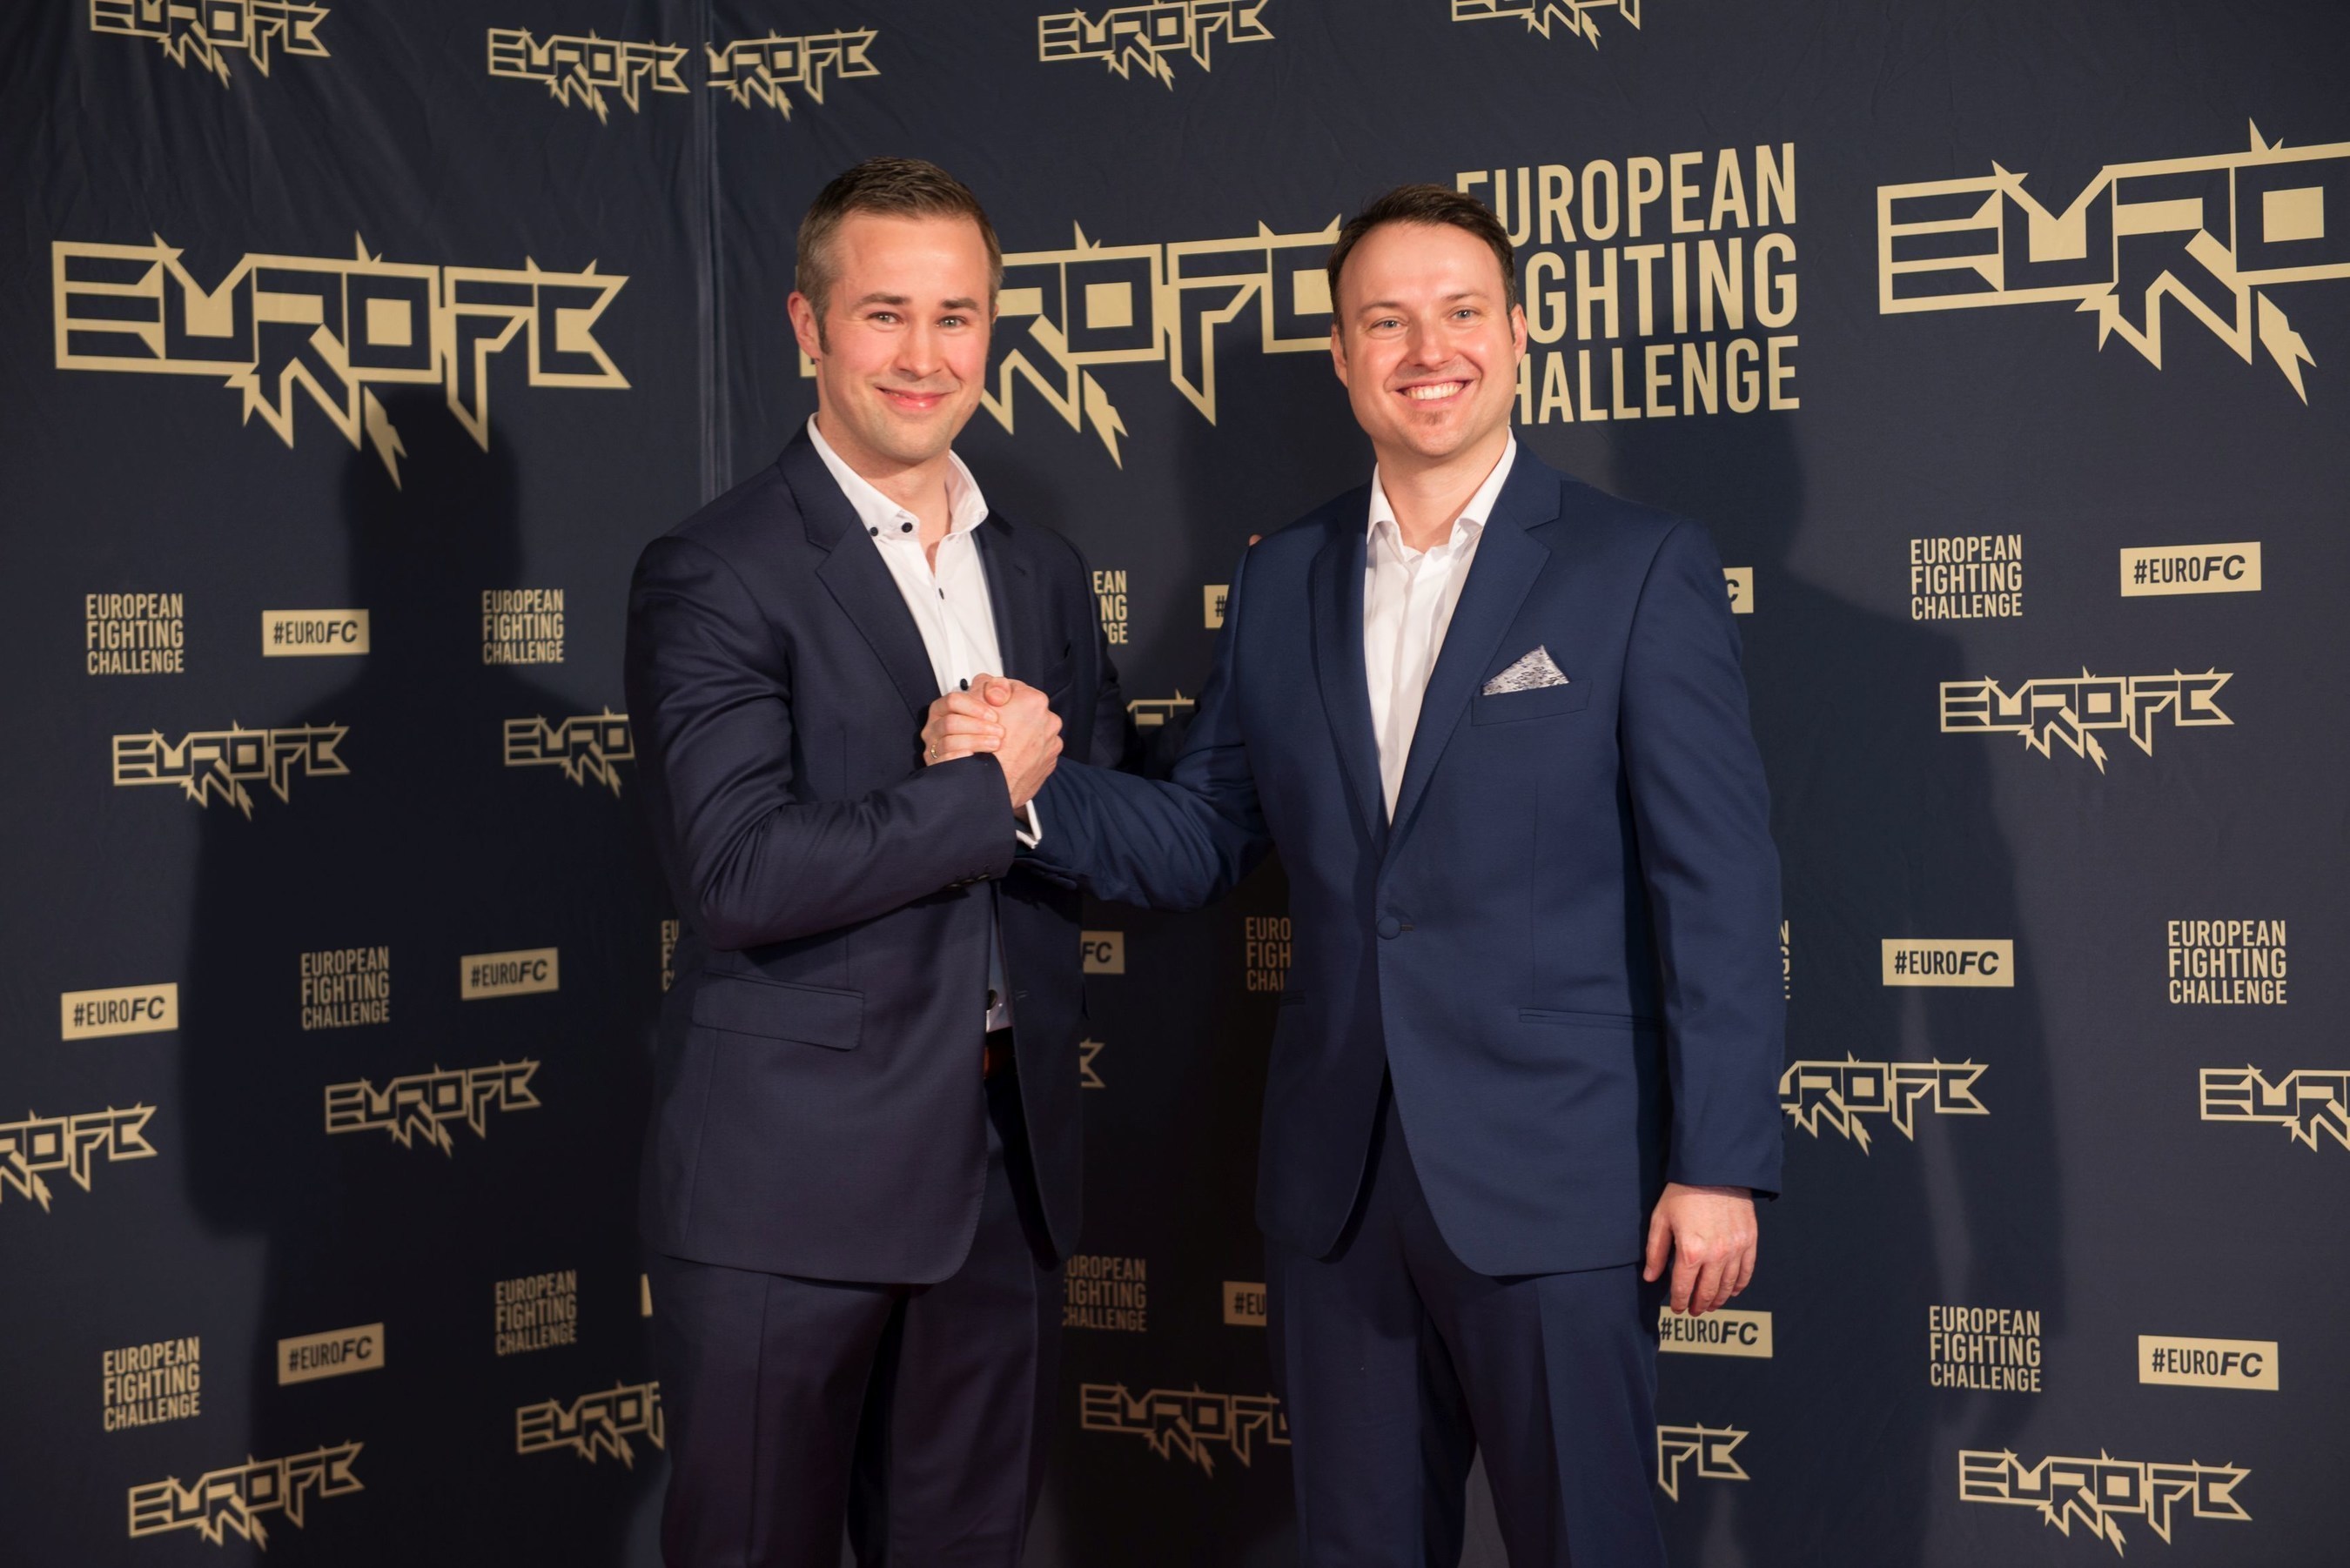 (on the left) Jarno Kukila, CEO of European Fighting Challenge and (on the right) Tim Leidecker, VP of Talent Relations of European Fighting Challenge are all smiles in Berlin at the launch event of the first All European MMA promotion (PRNewsFoto/European Fighting Challenge)